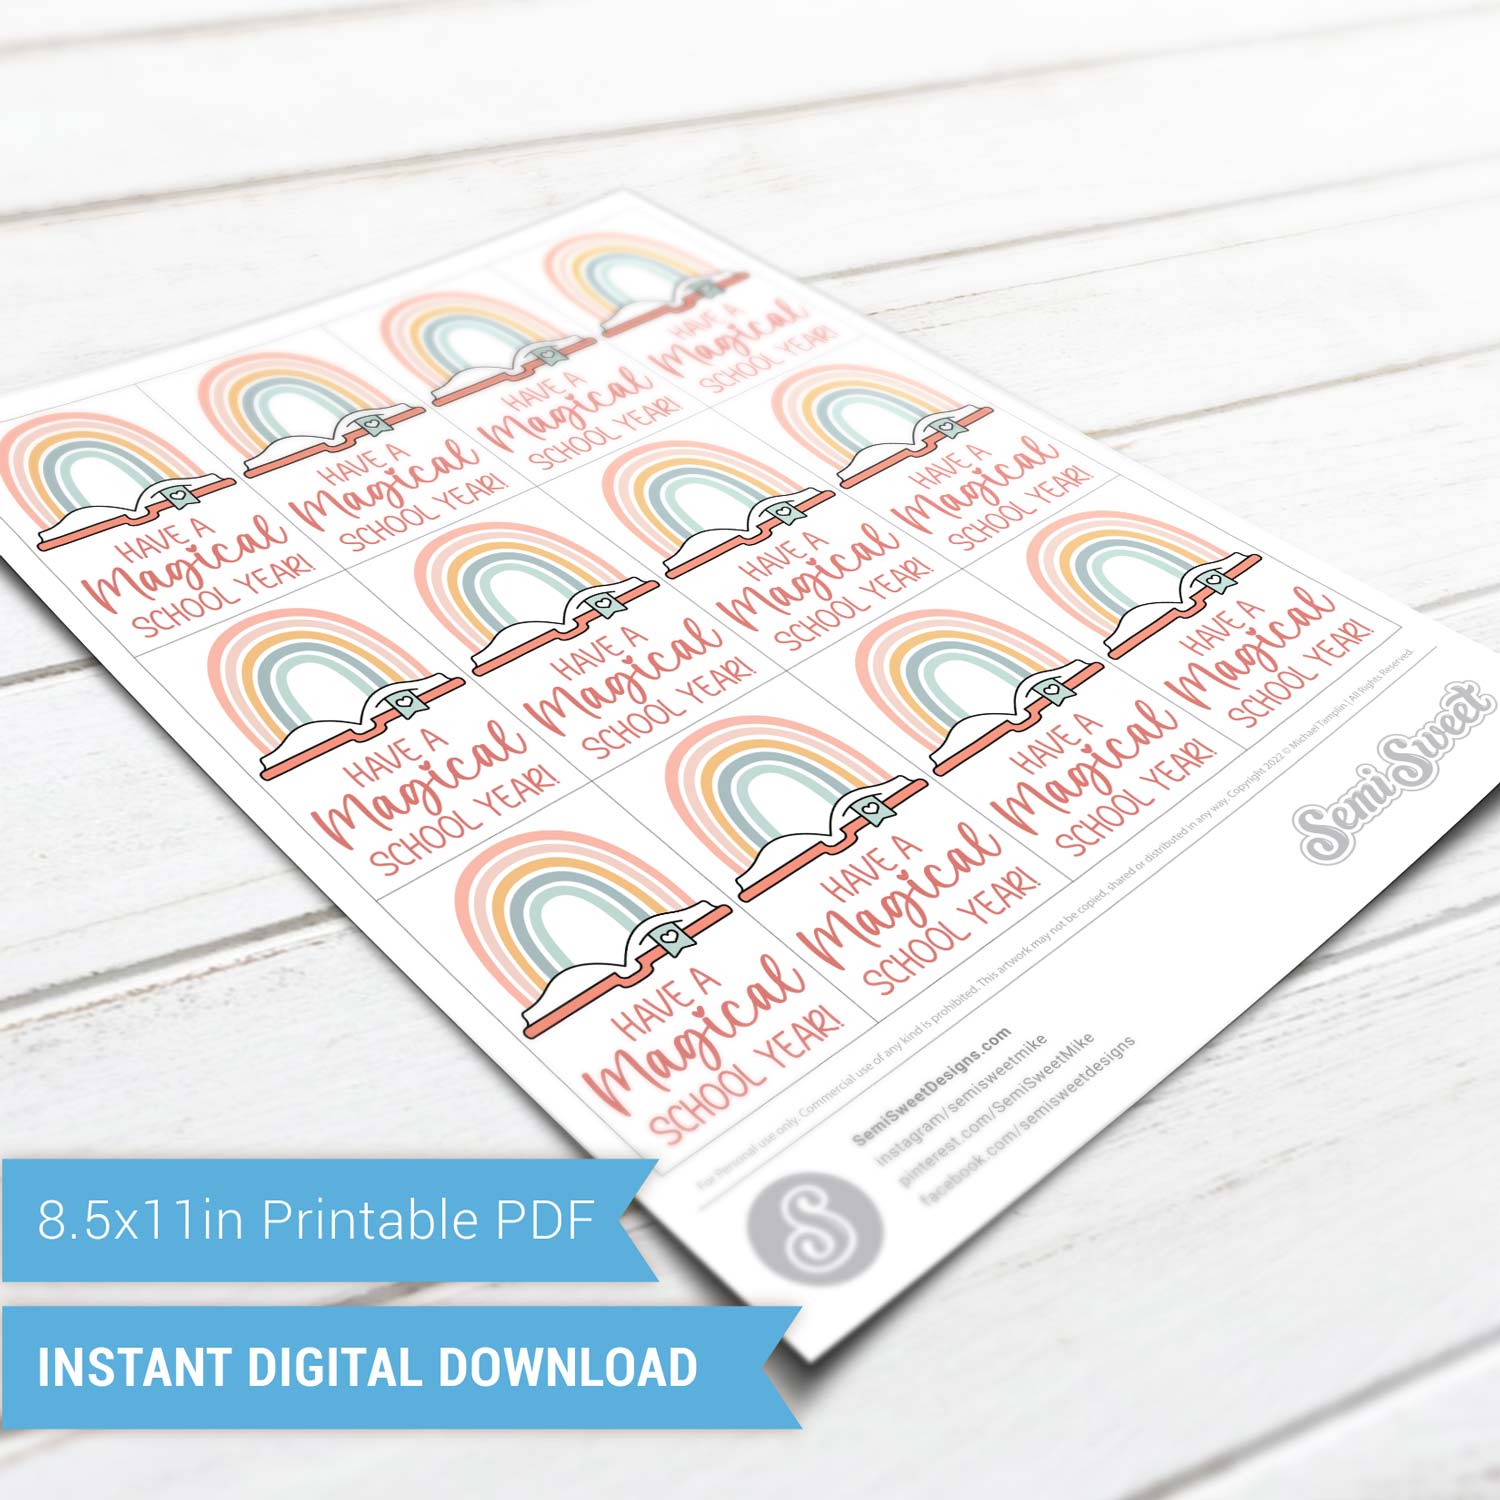 Have a Magical School Year - Instant Download Printable 3"x 2" Tag